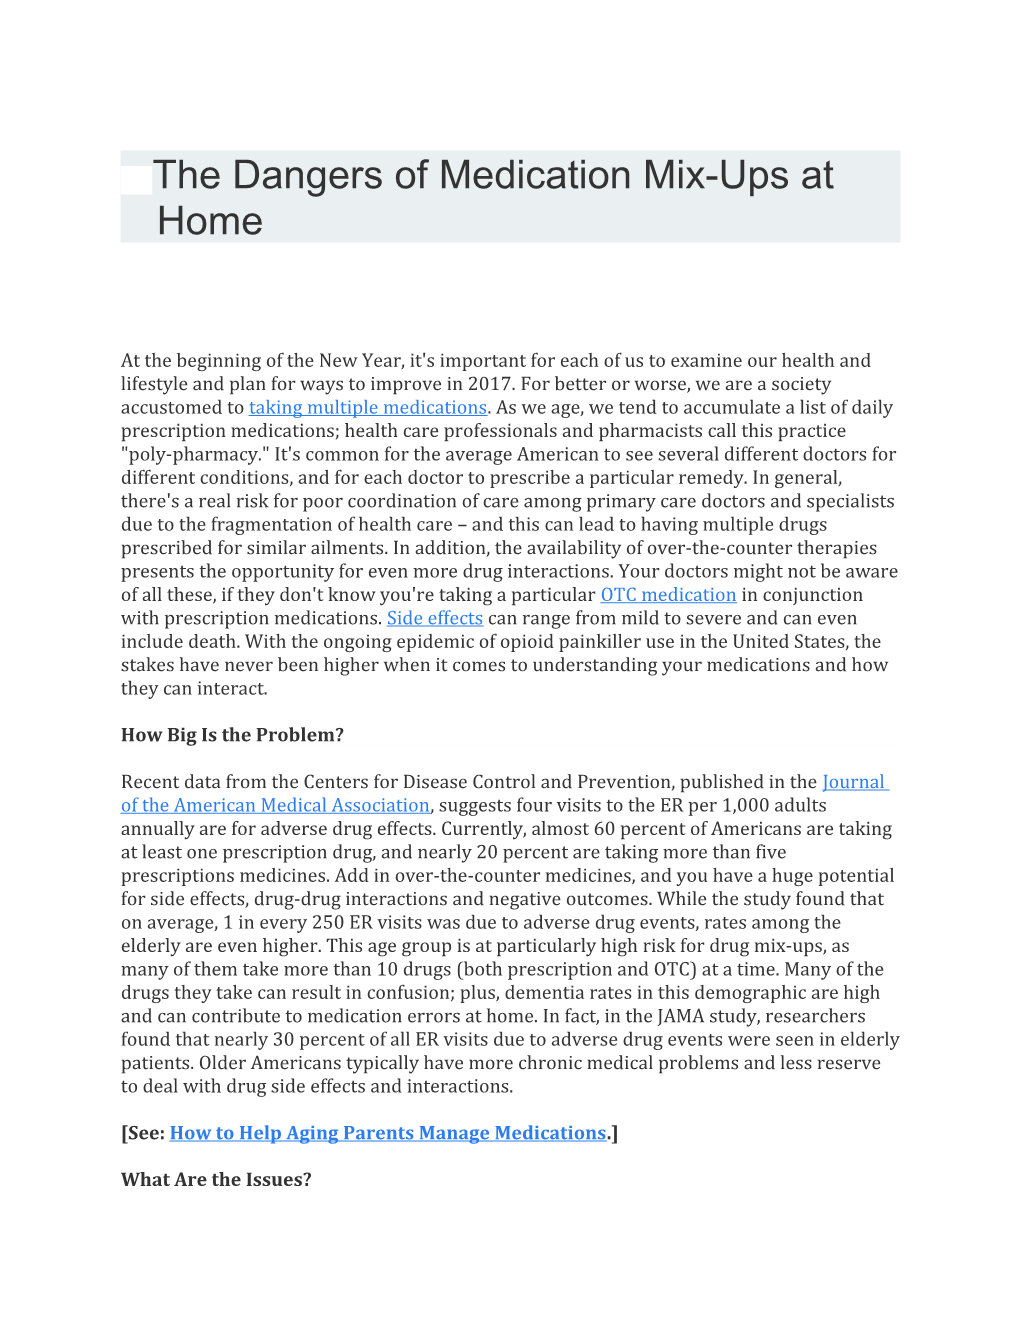 The Dangers of Medication Mix-Ups at Home